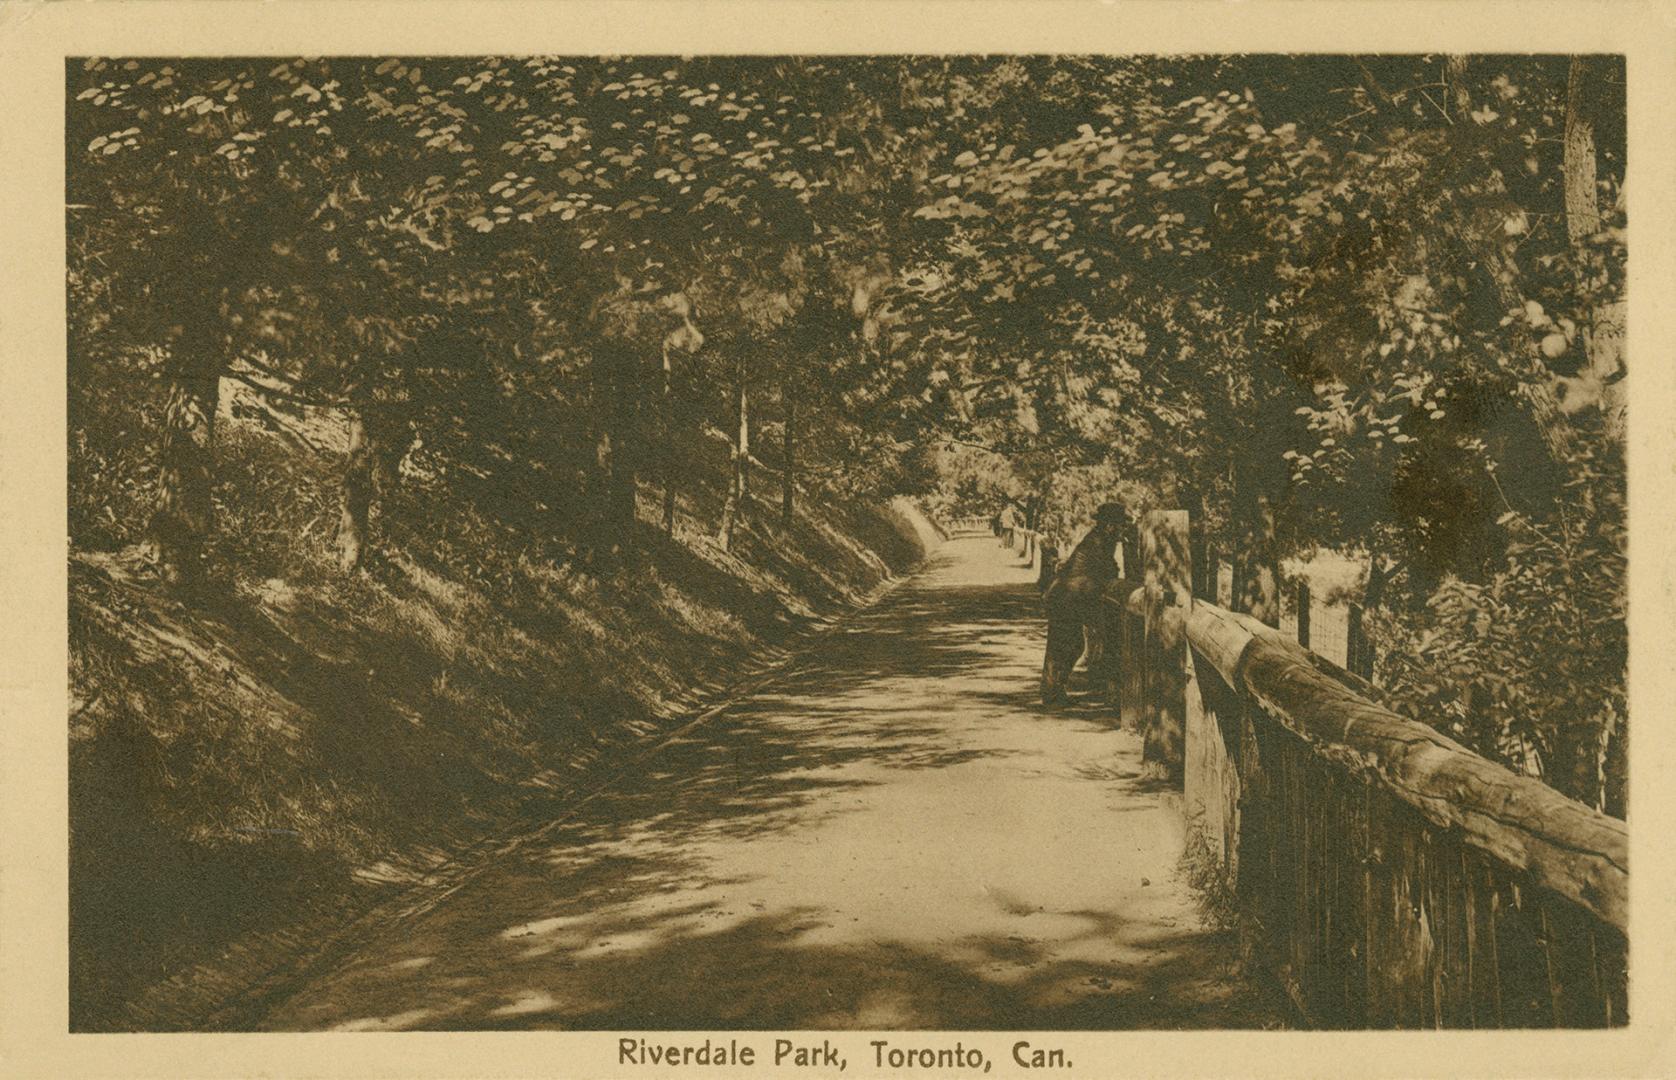 Sepia toned picture of a pathway in a wooded area with a log fence to the right.